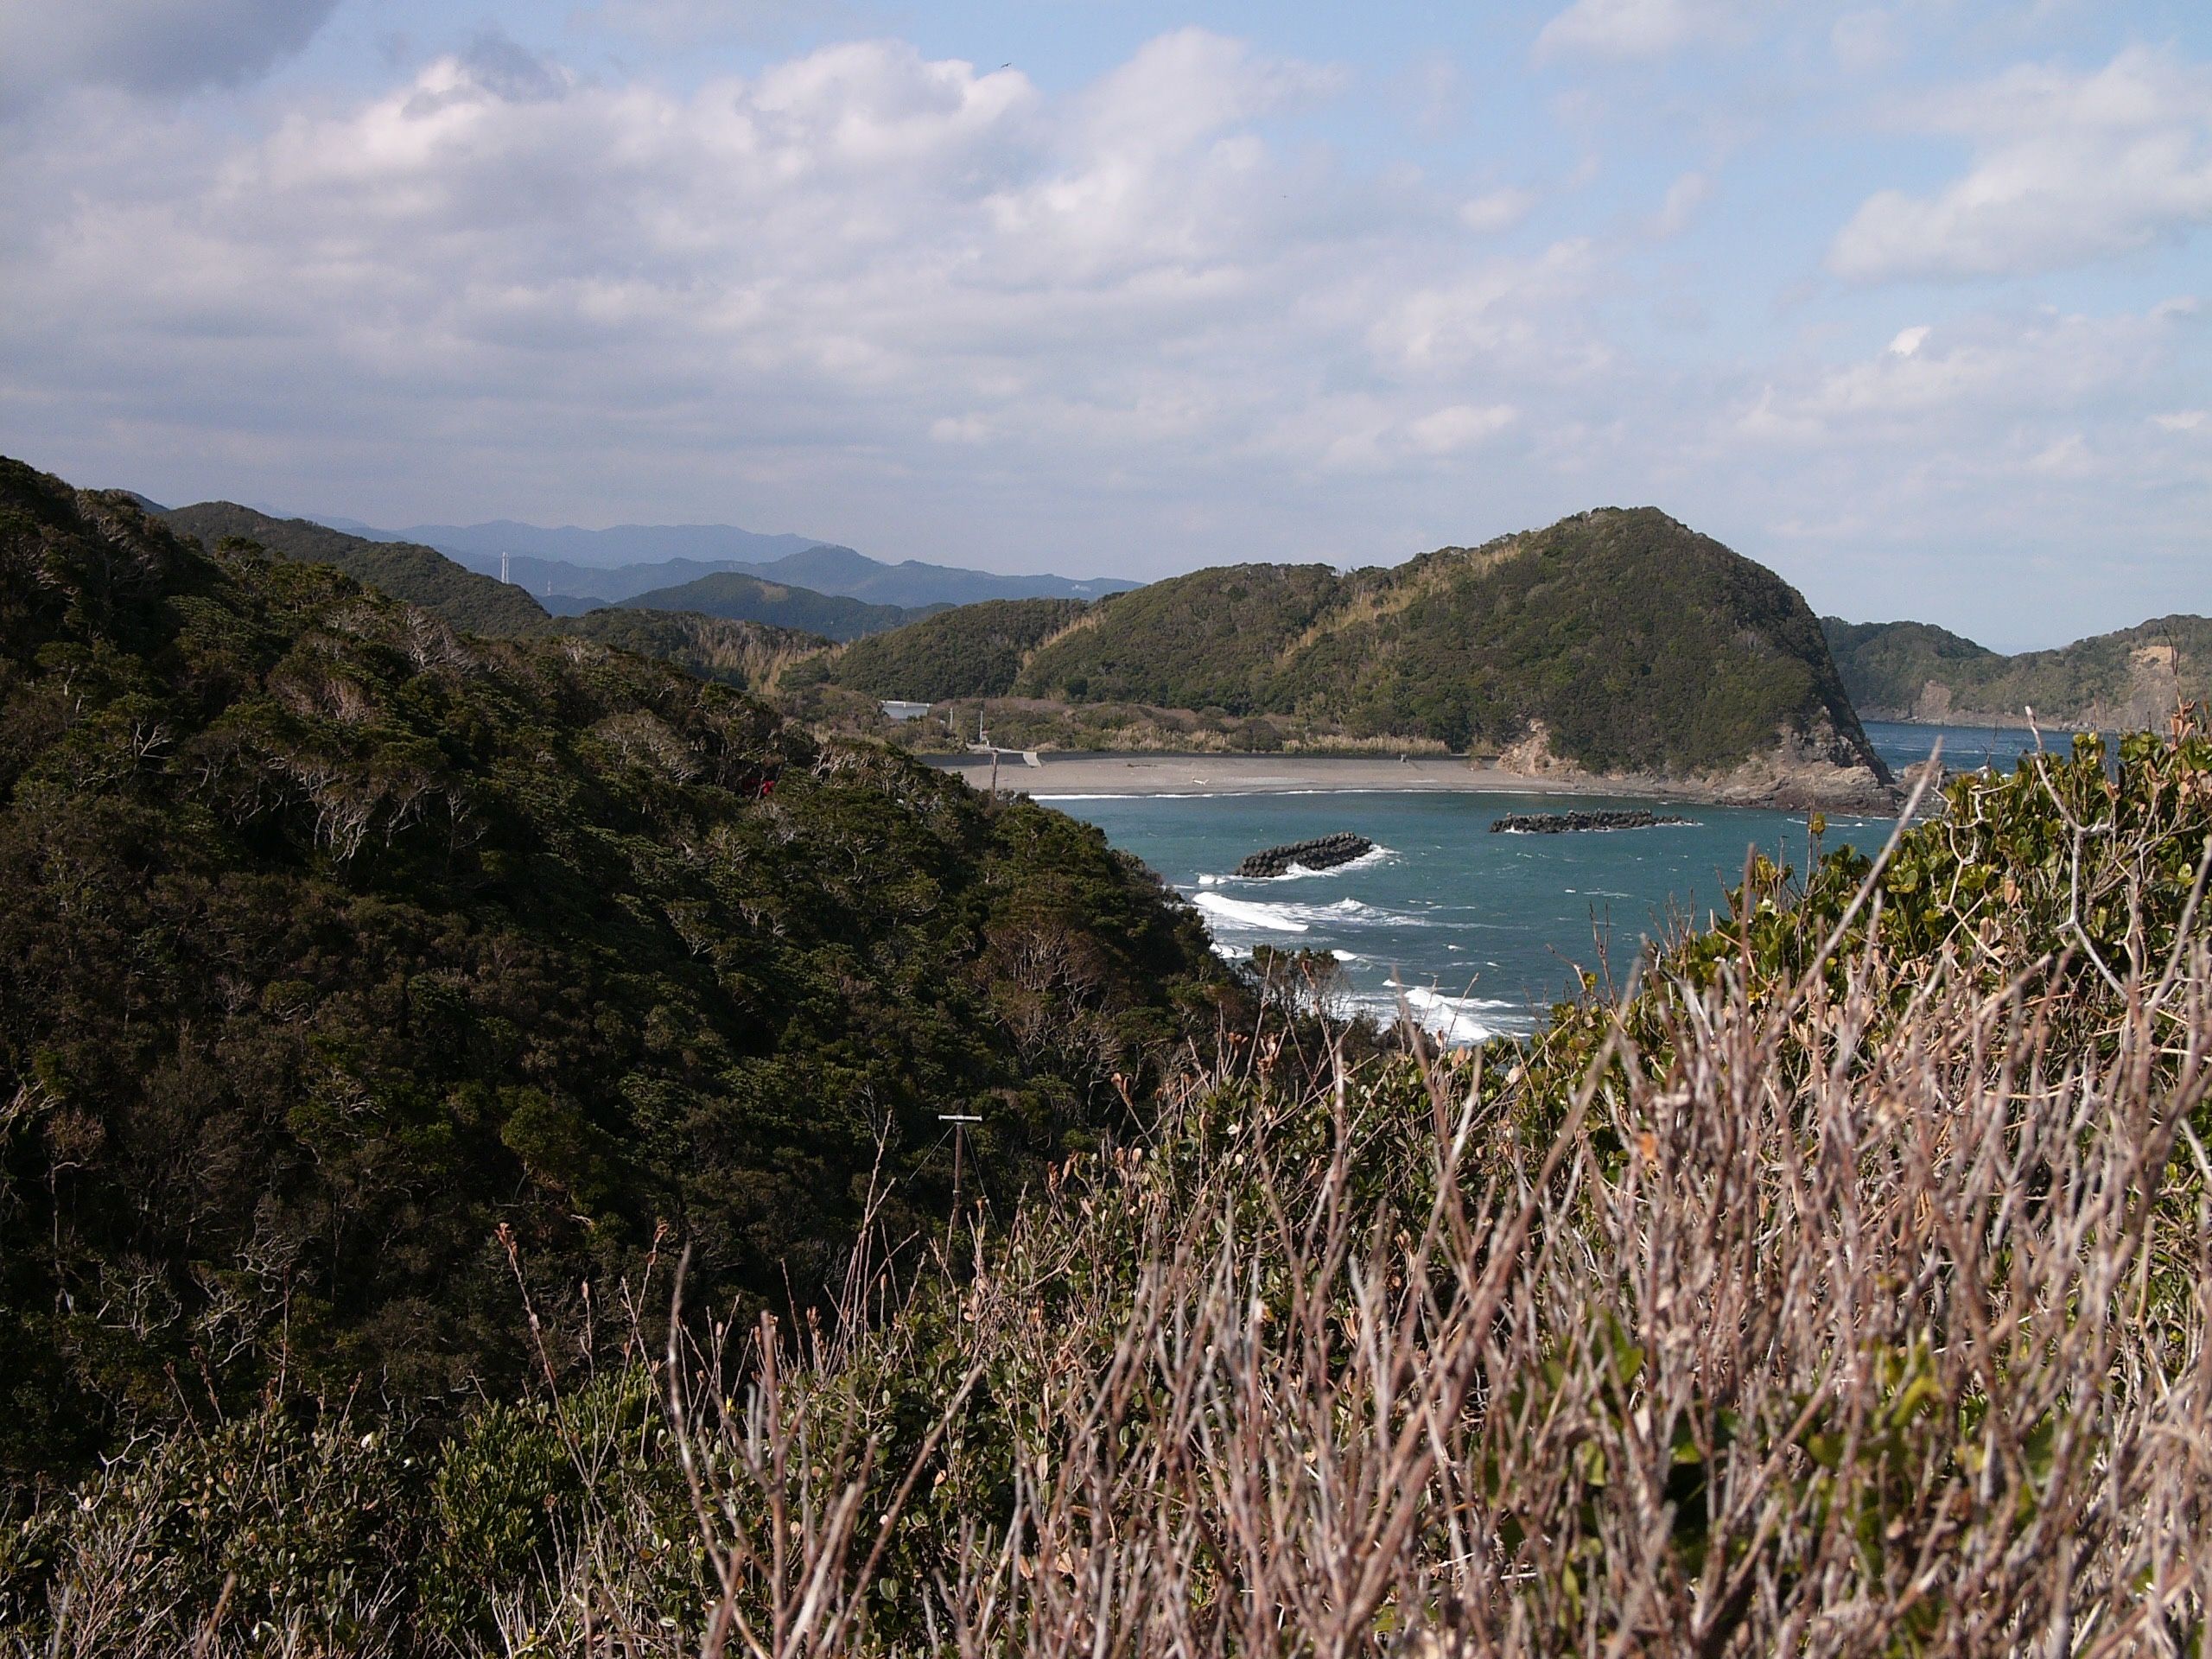 Panorama of a jagged seashore with two small bays and lines of forested hills.